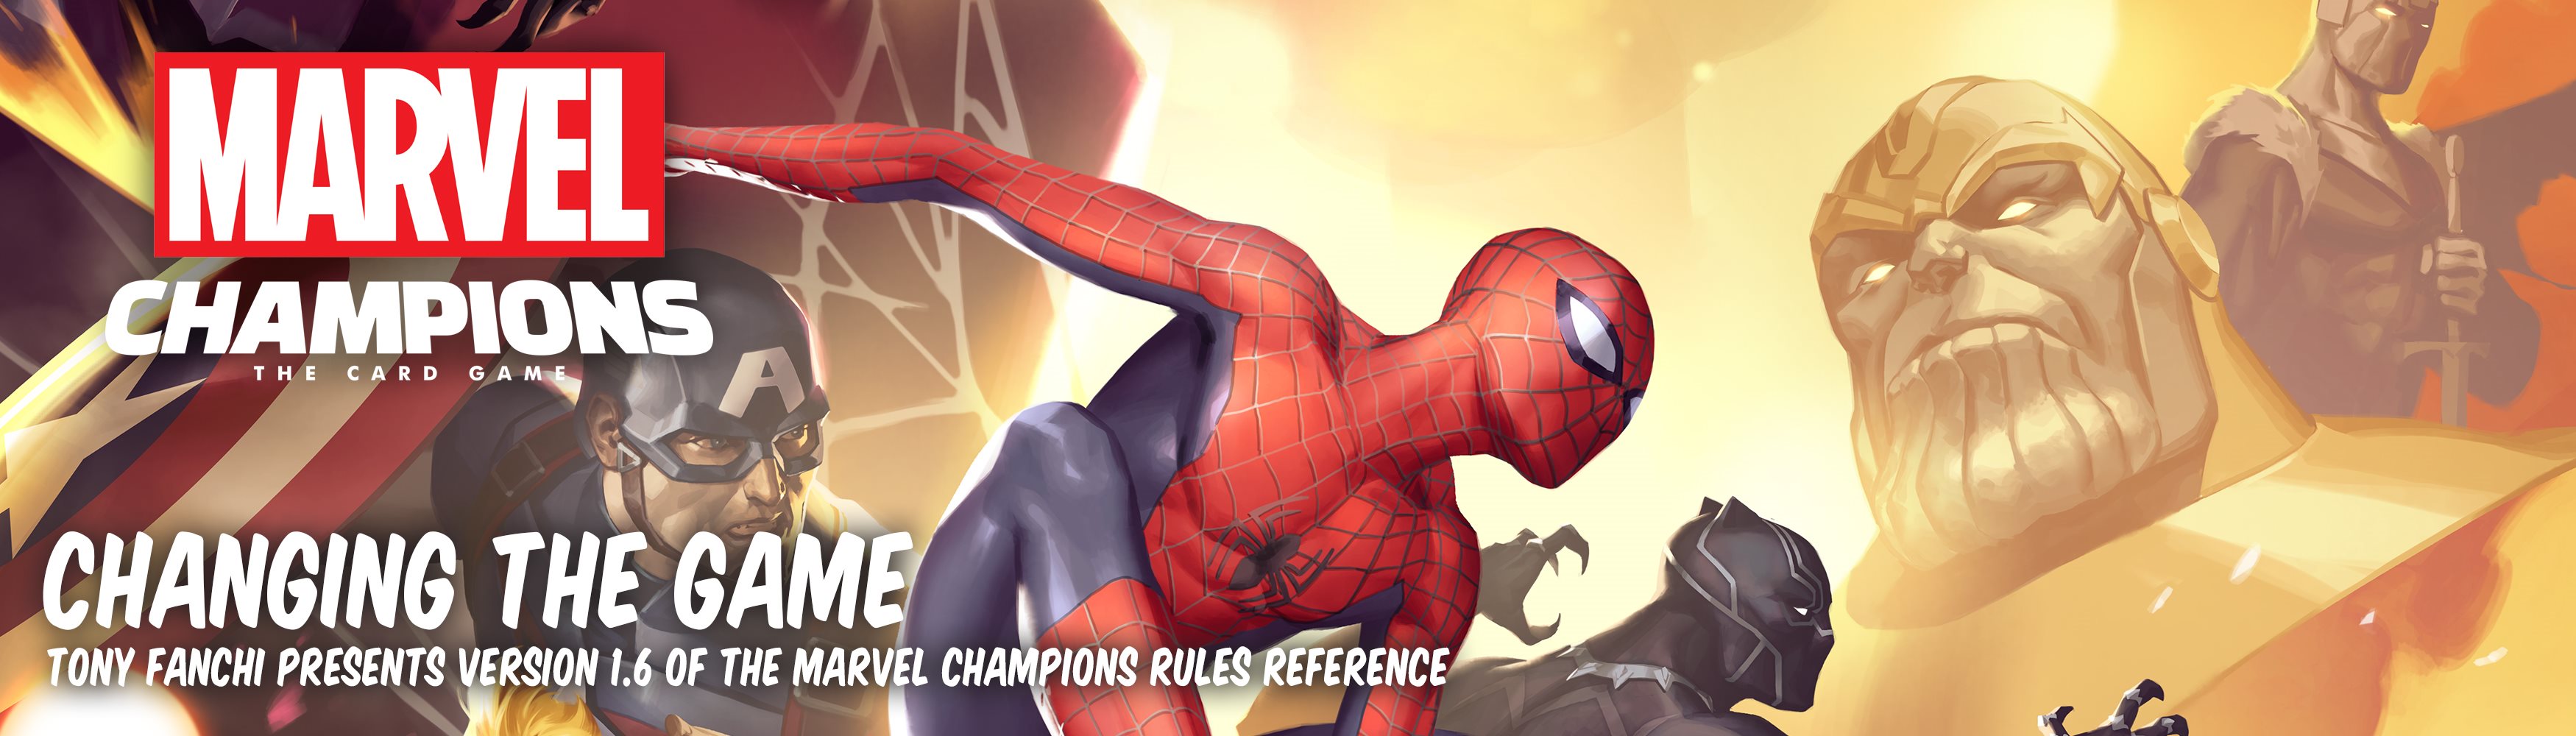 Tony Fanchi Presents V1.6 of the Marvel Champions Rules Reference